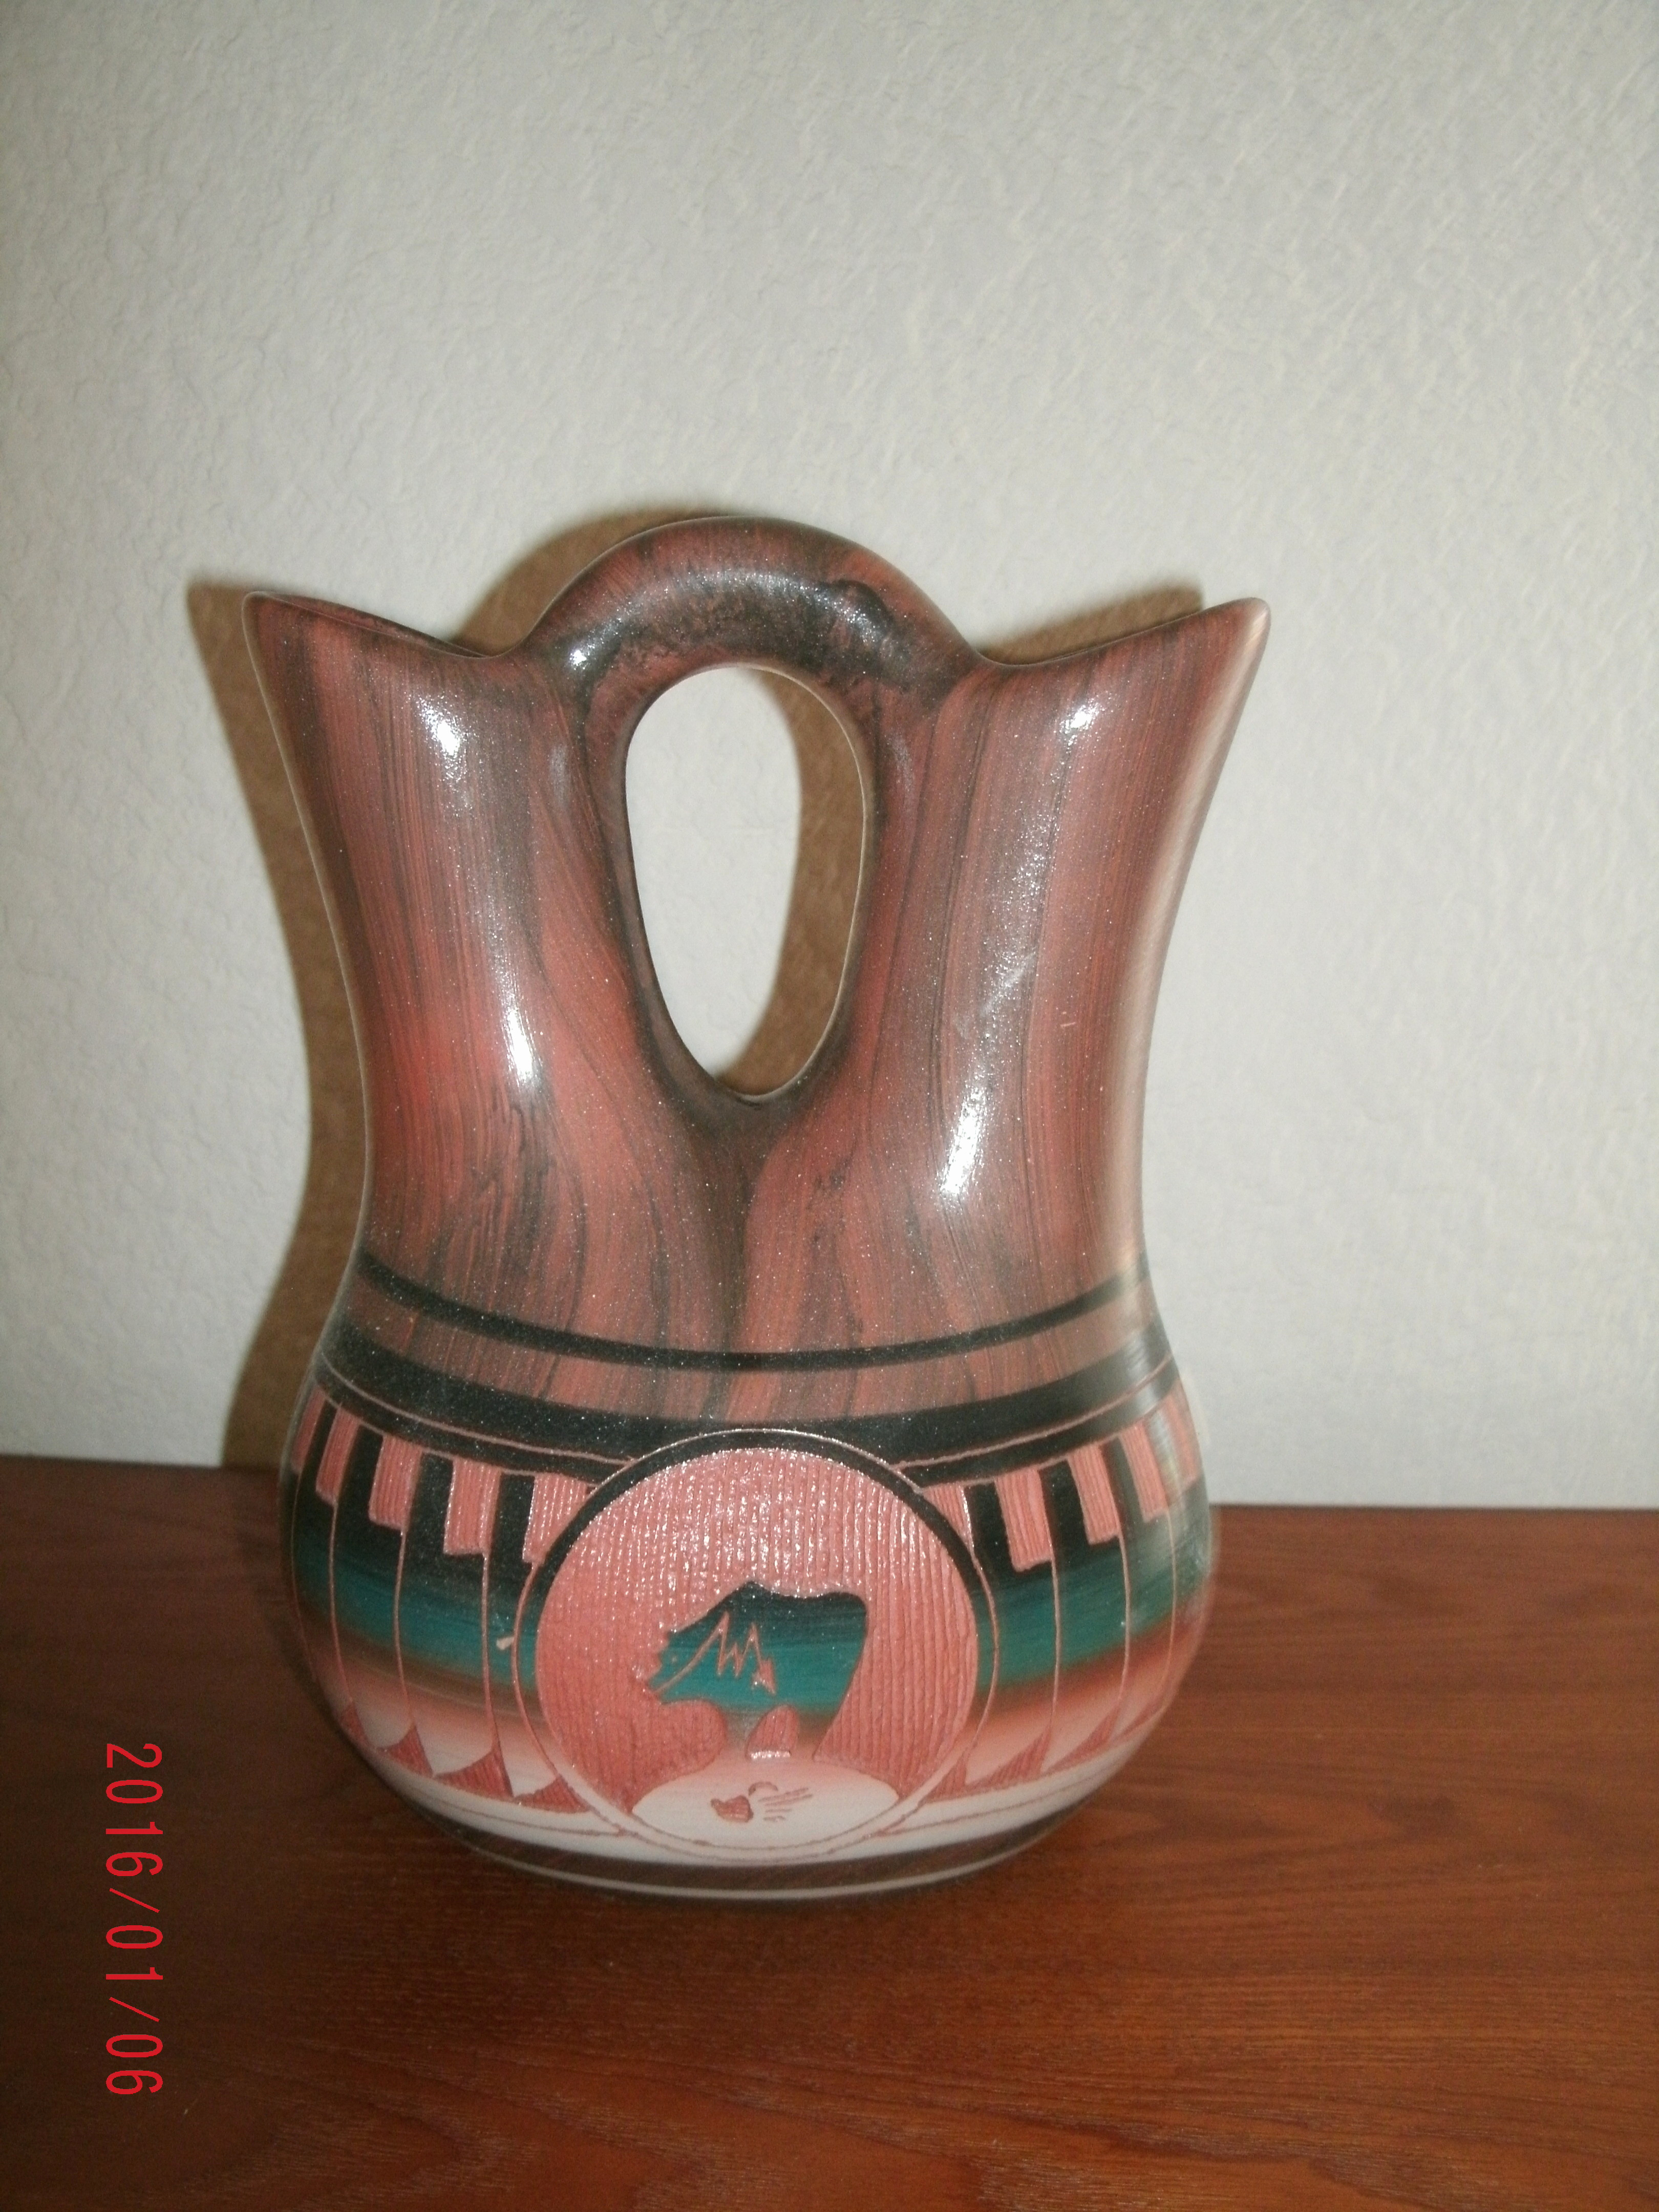 16 Cute Native American Vases 2024 free download native american vases of navajo wedding vase story vase and cellar image avorcor com with regard to navajo wedding vase story and cellar image avorcor